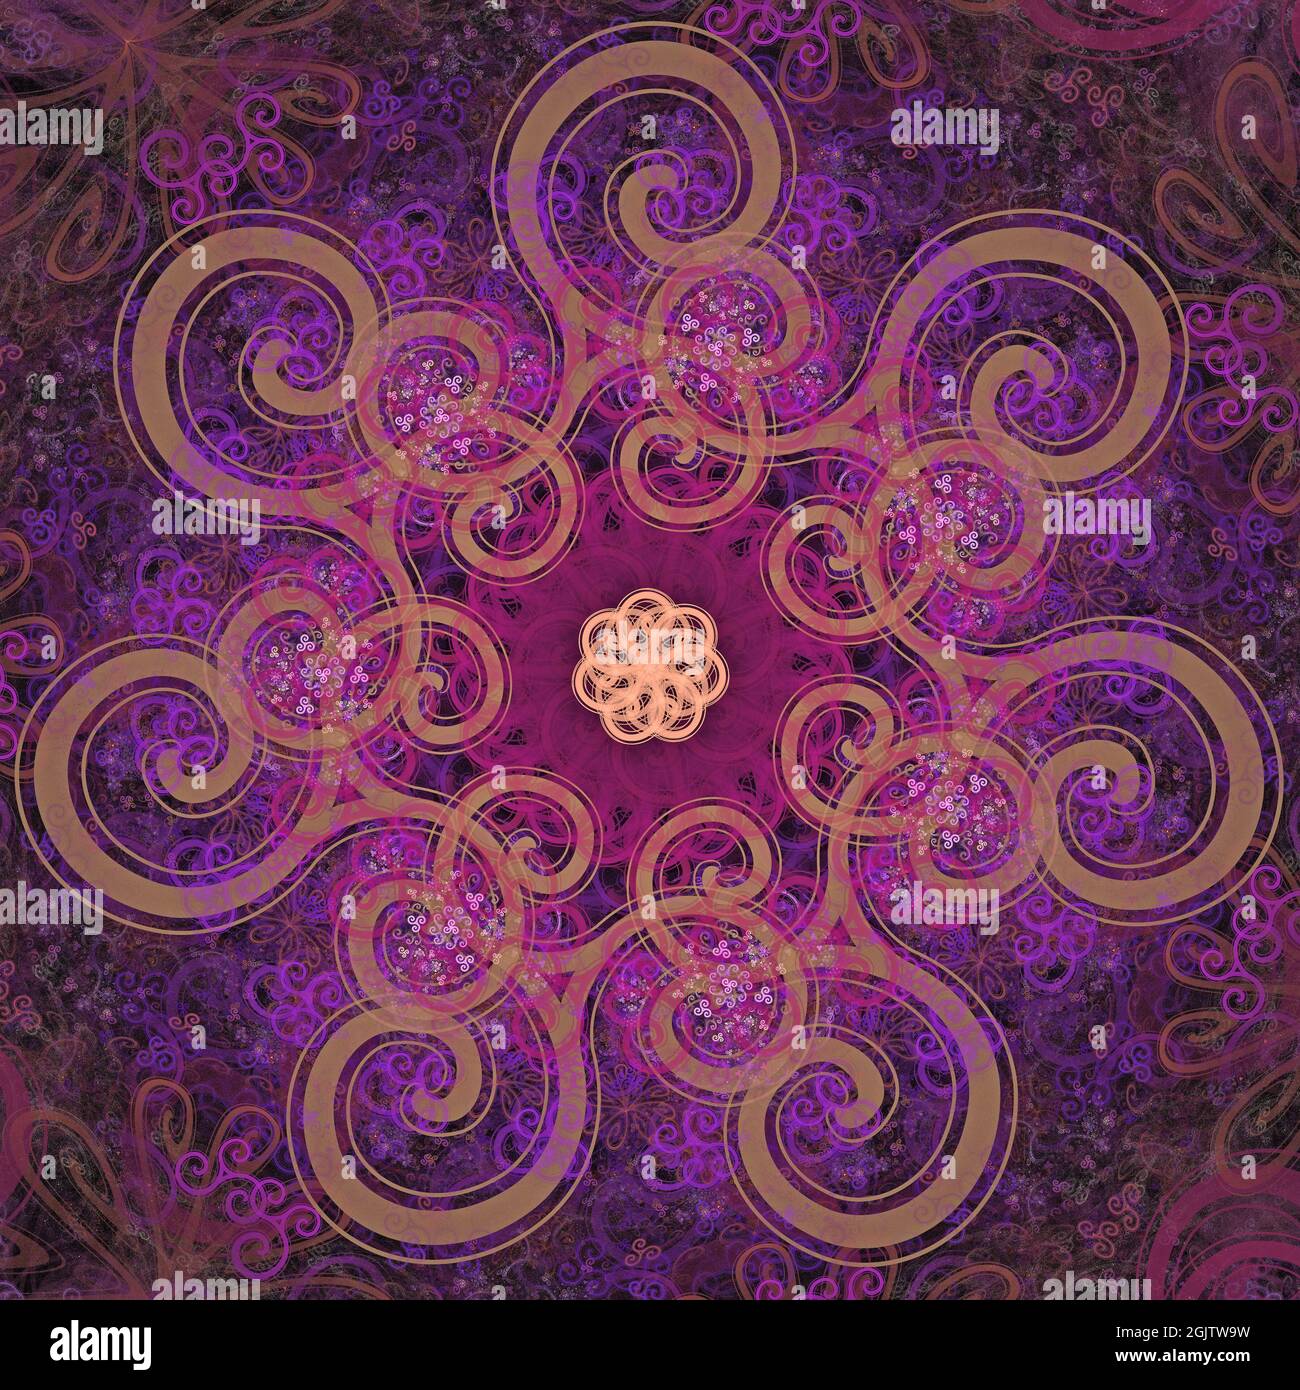 Colourful swirly design based on the triskeles or triskelion motif Stock Photo